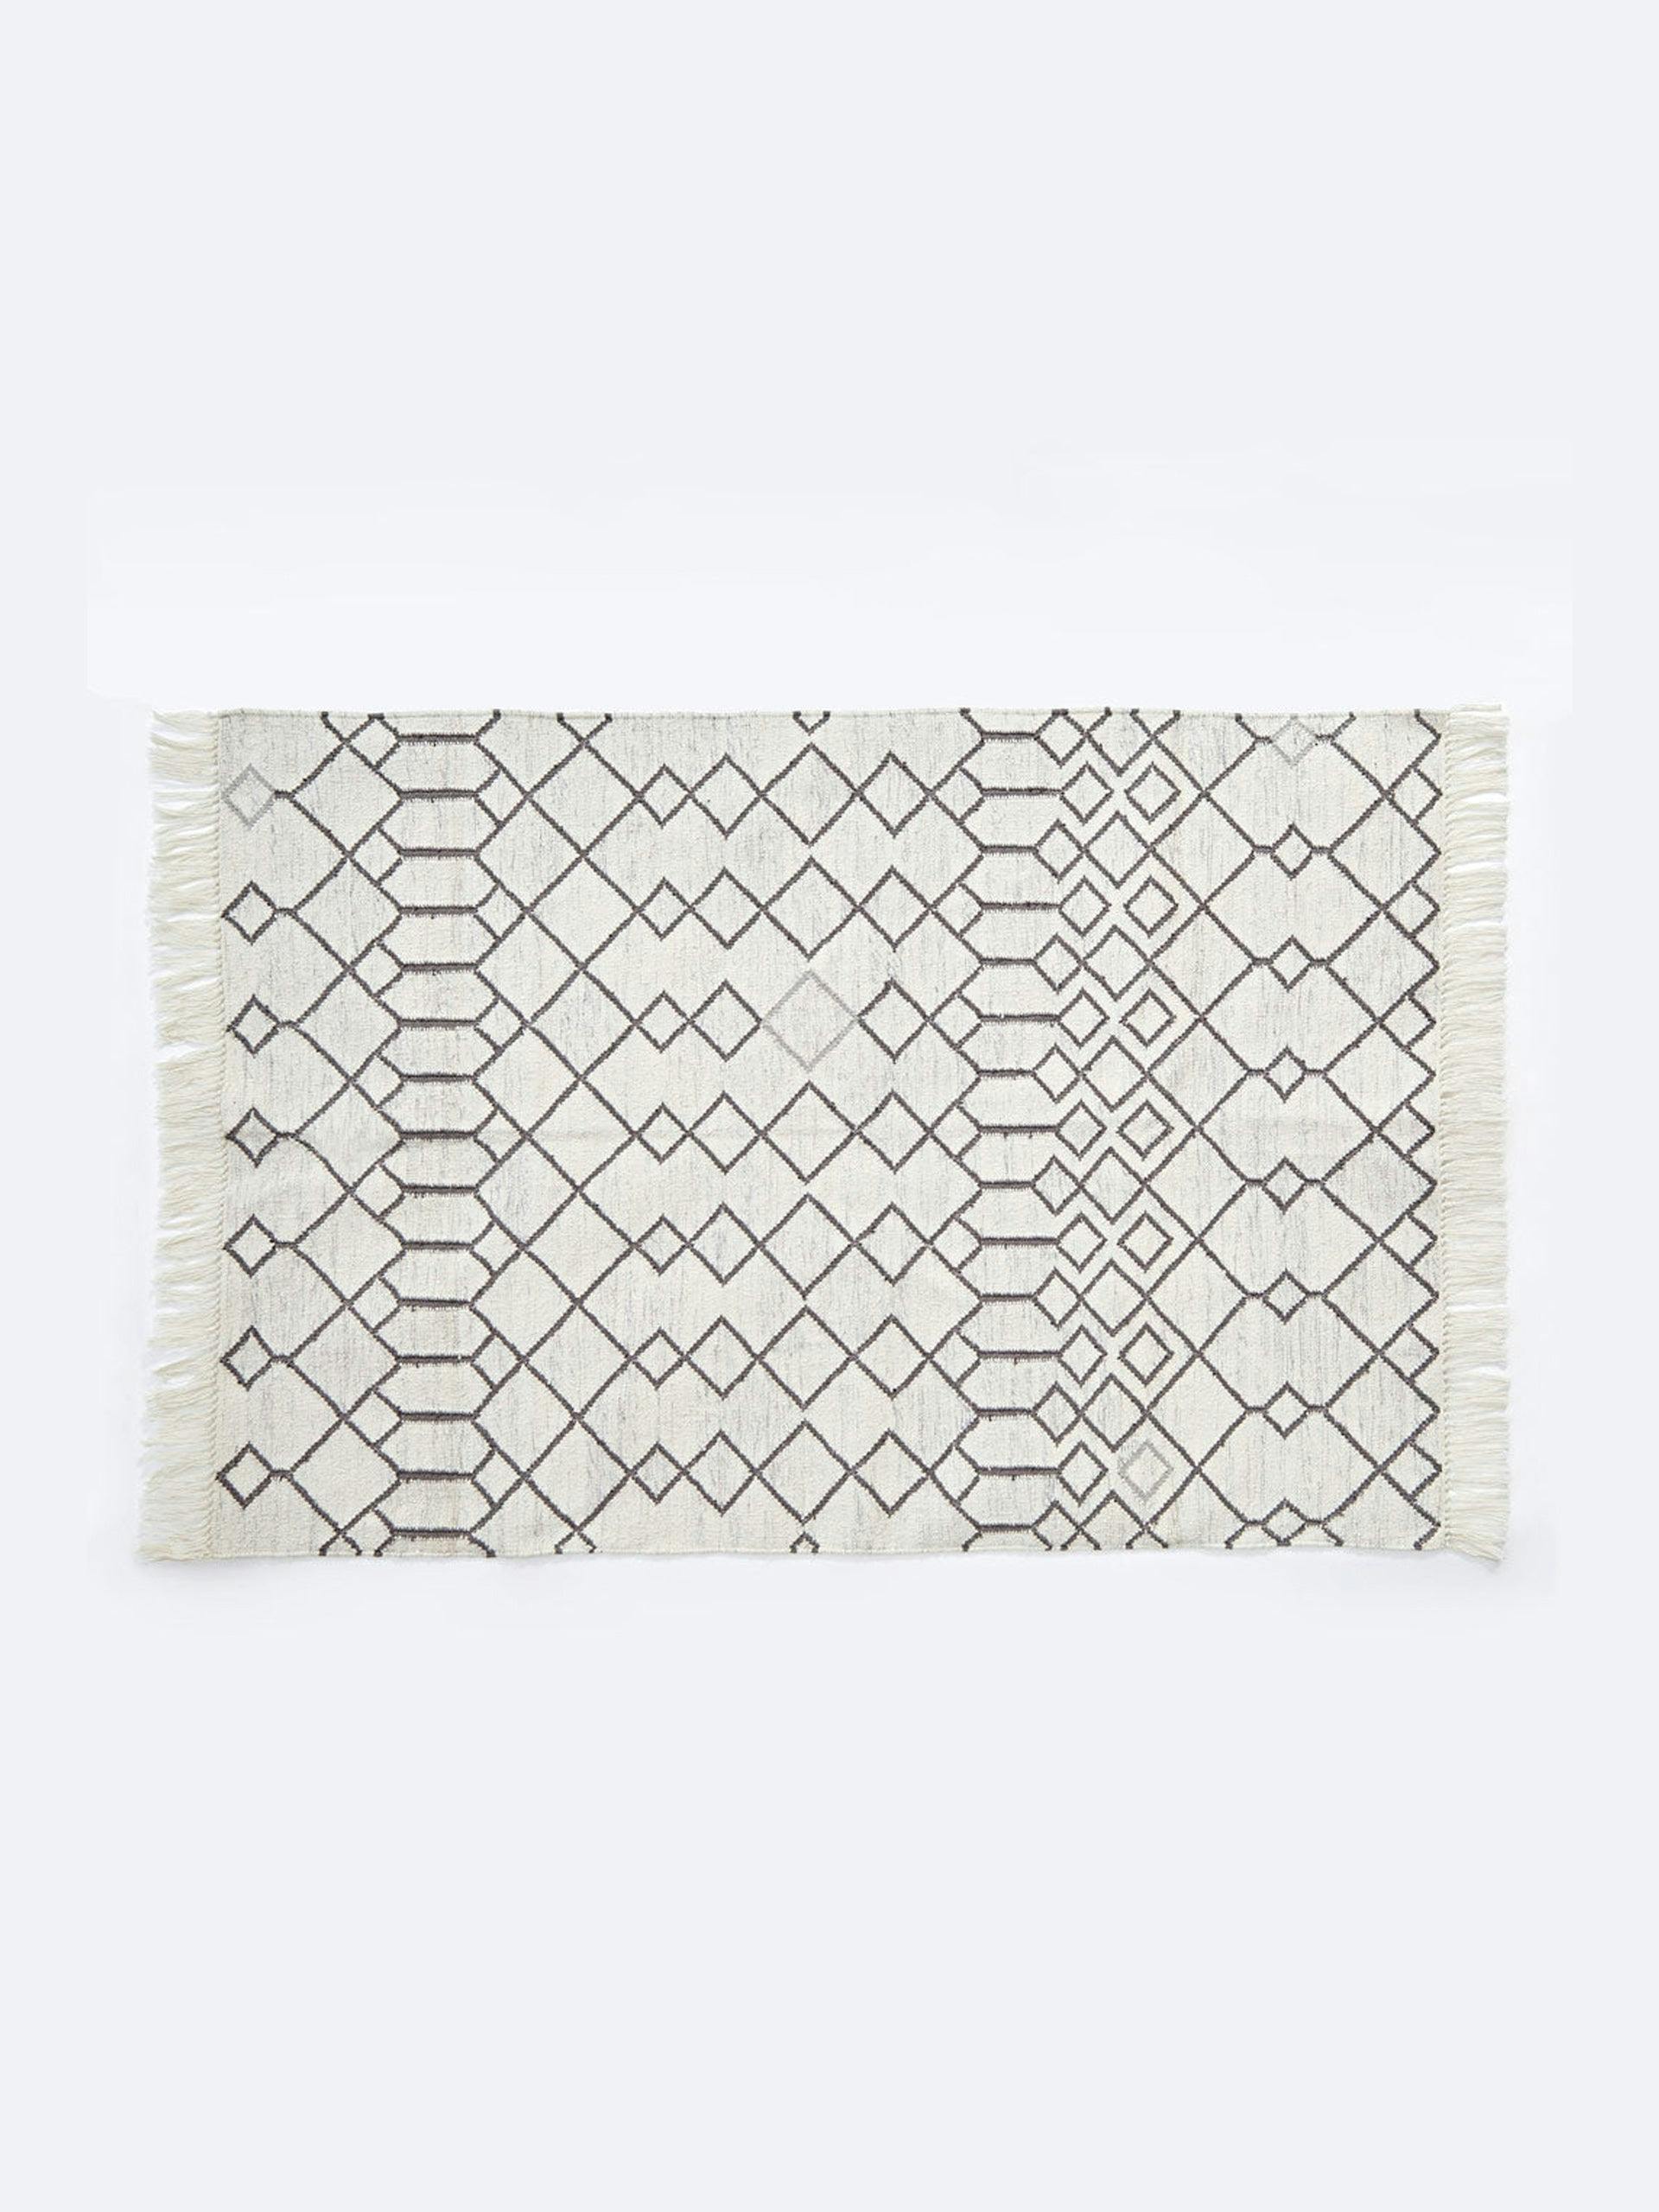 Moroccan inspired rug